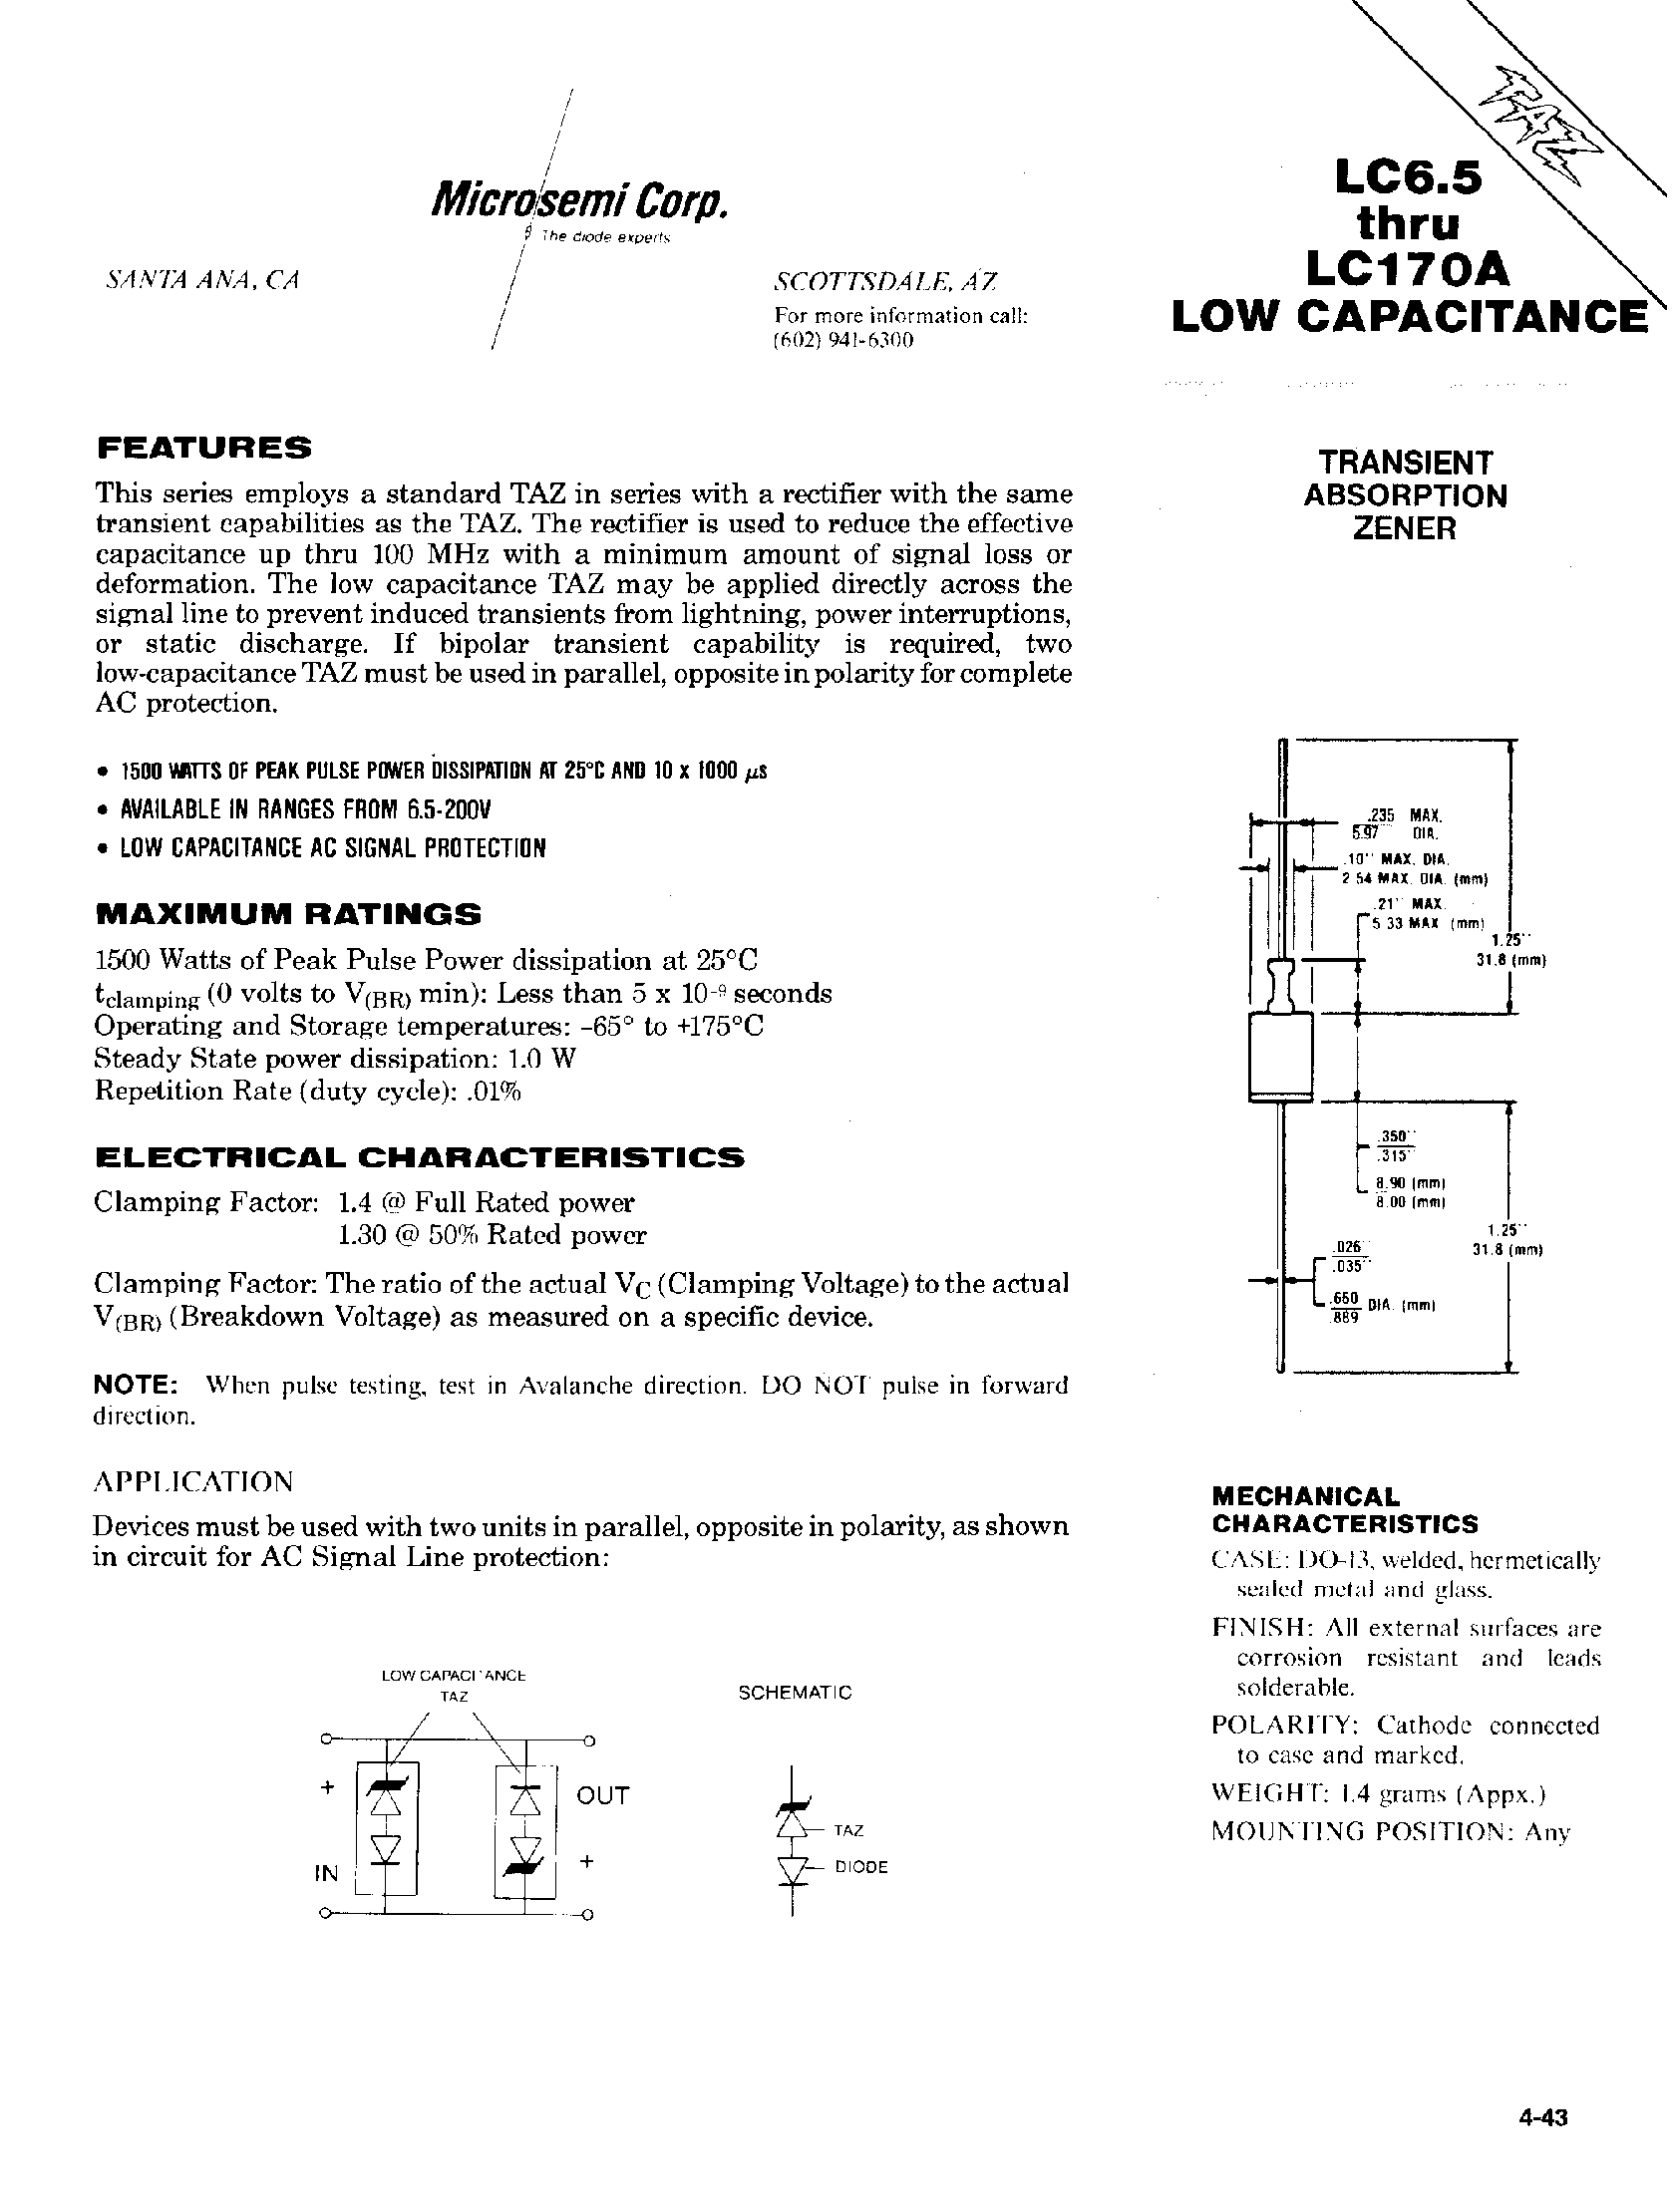 Datasheet LC120 - TRANSIENT ABSORPTION ZENER page 1